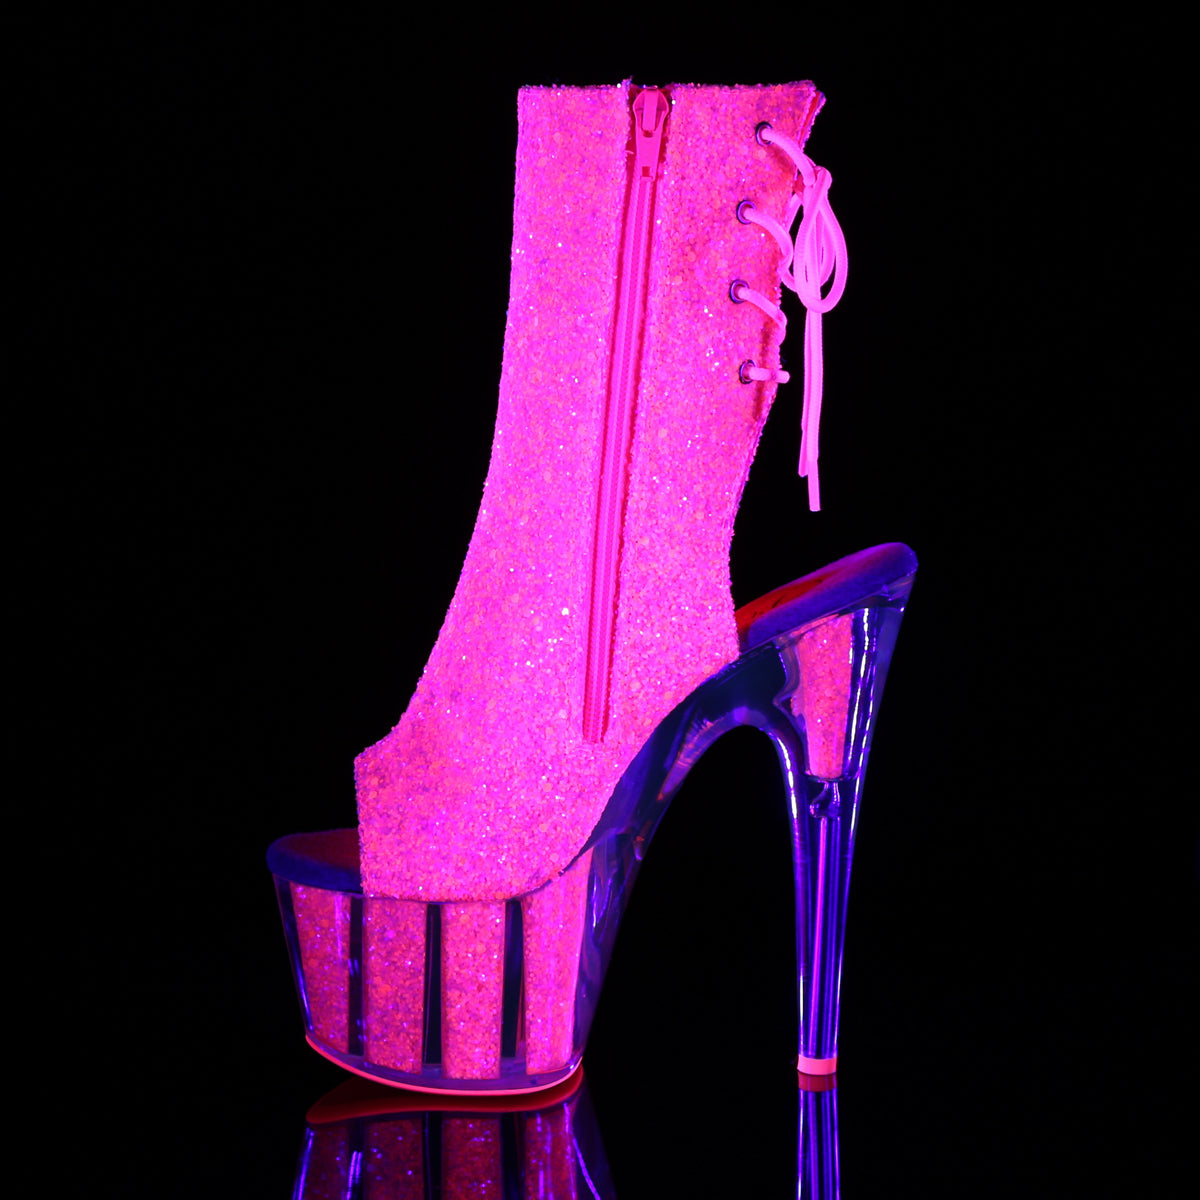 ADORE-1018G 7" Heel Neon Pink Glitter Strippers Ankle Boots-Pleaser- Sexy Shoes Pole Dance Heels